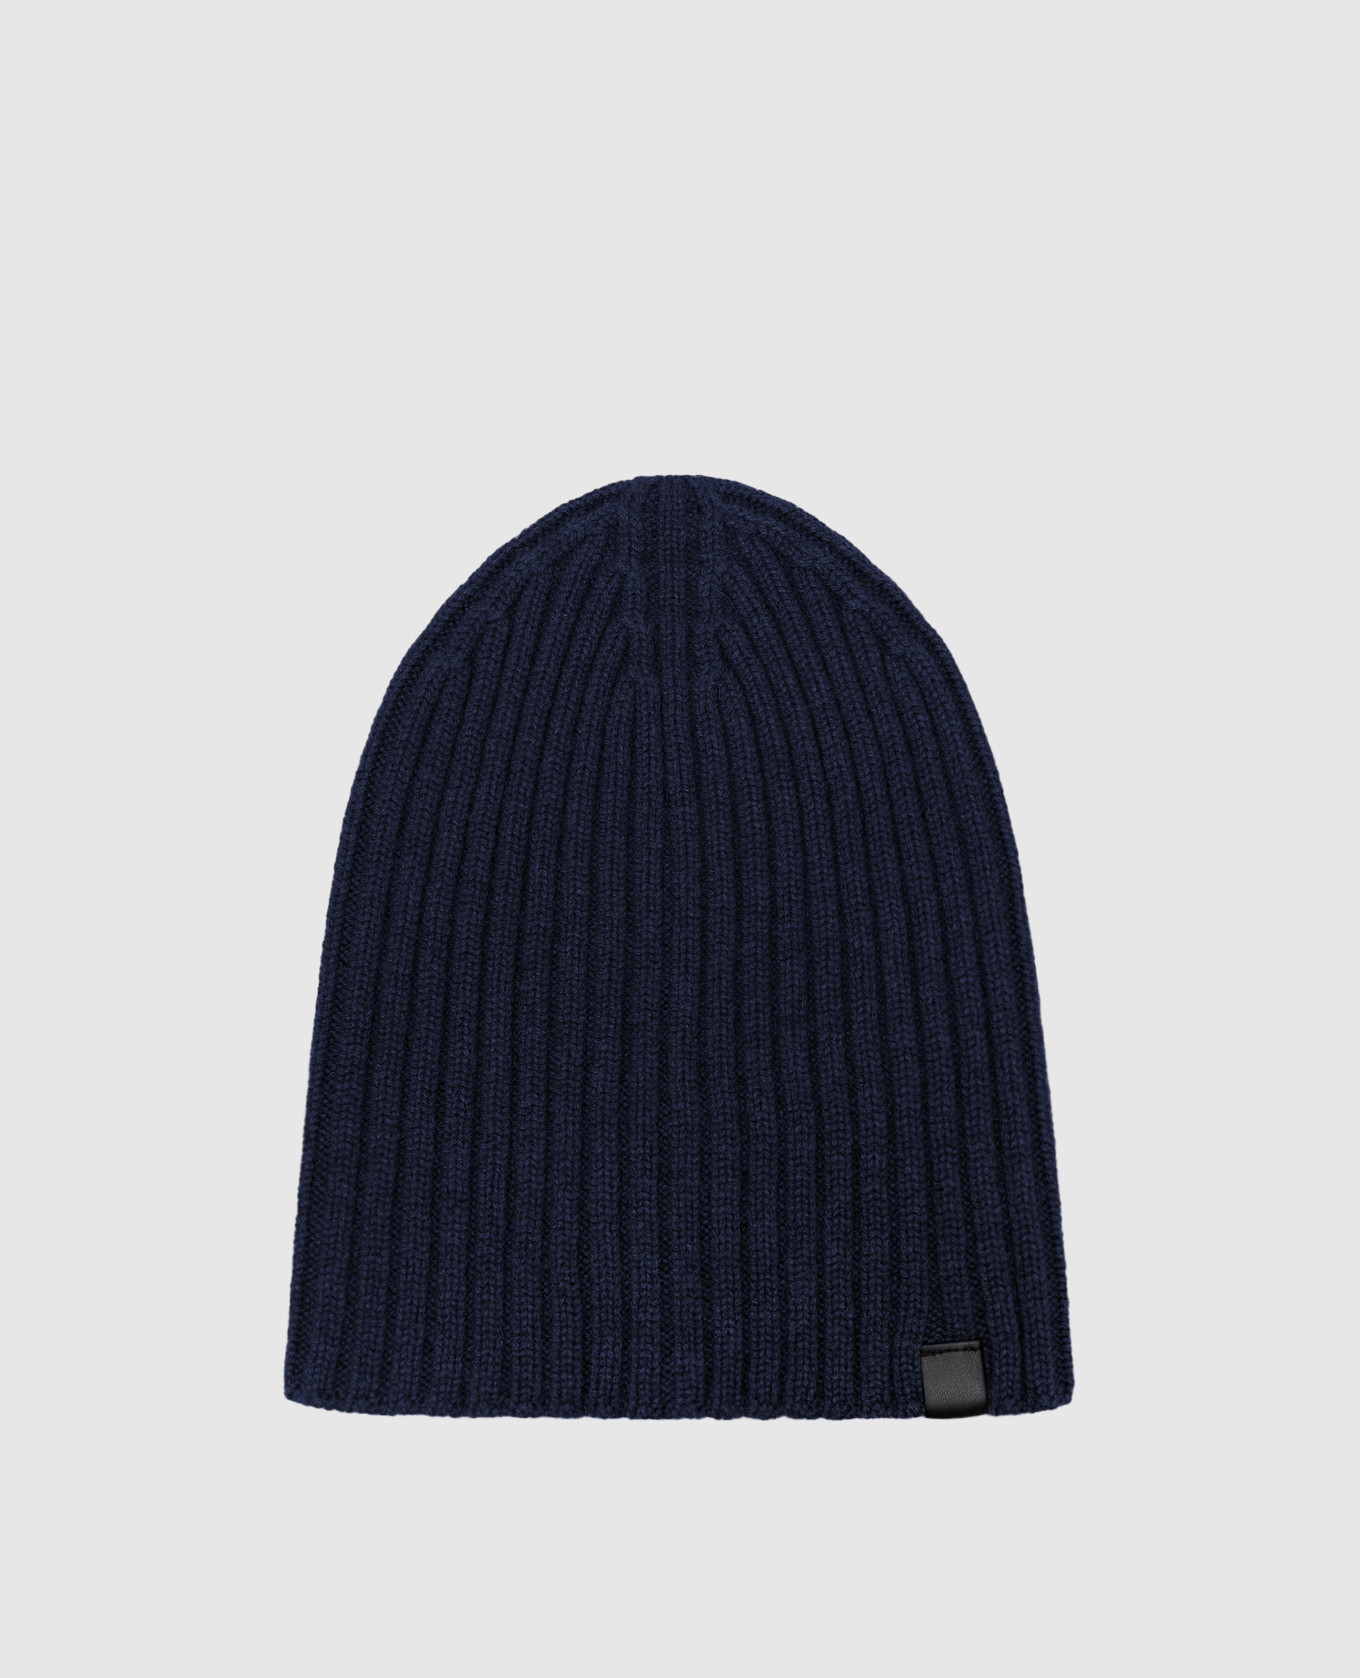 Blue ribbed cashmere hat